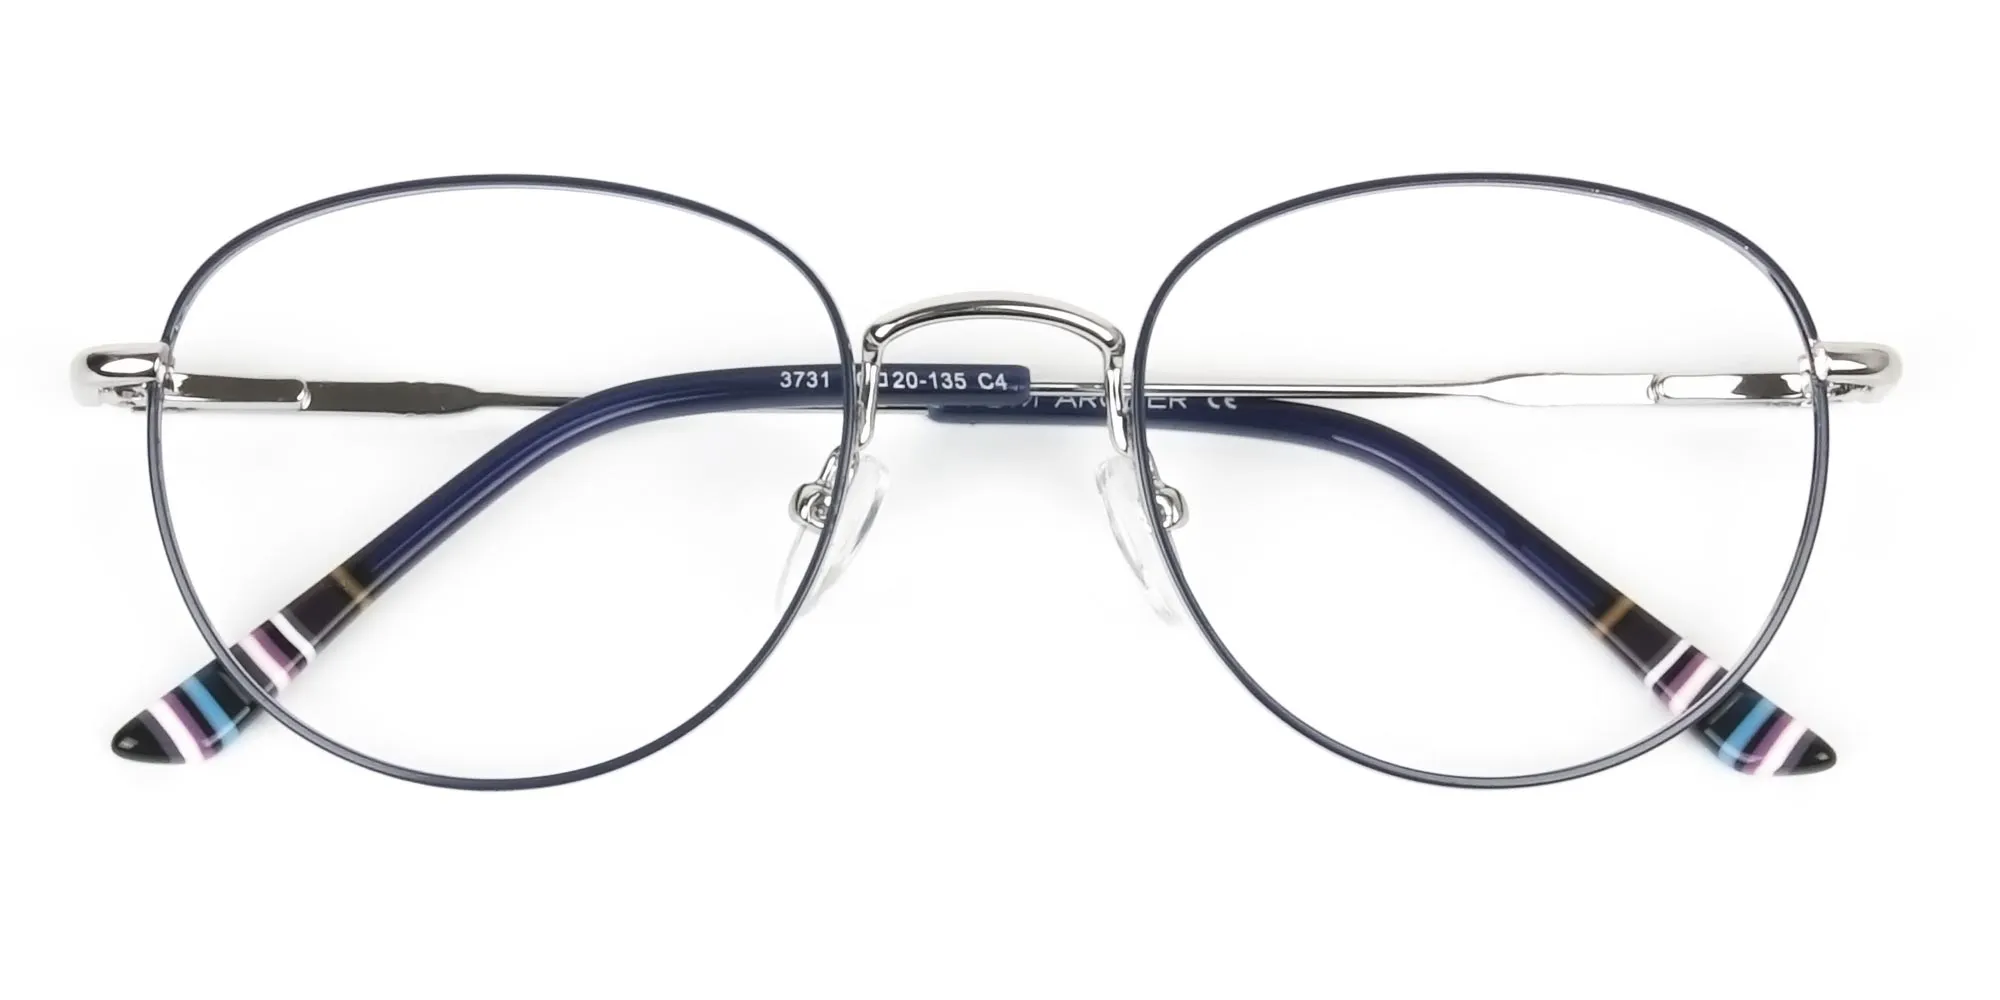 Lightweight Silver & Royal Blue Round Spectacles - 2